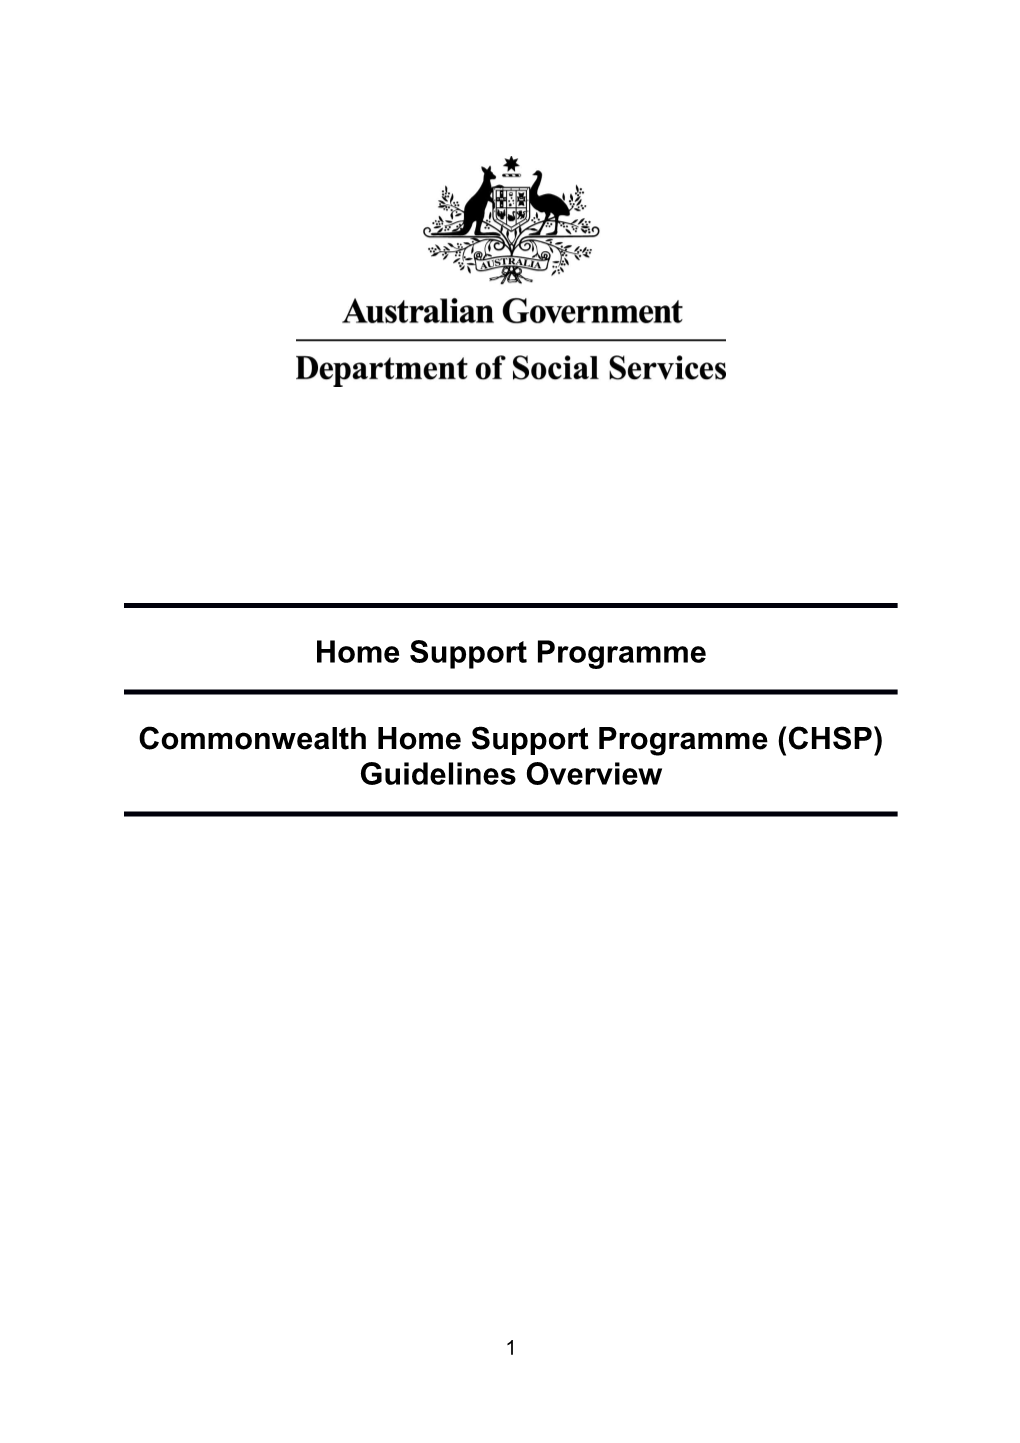 Commonwealth Home Support Programme(CHSP) Guidelines Overview